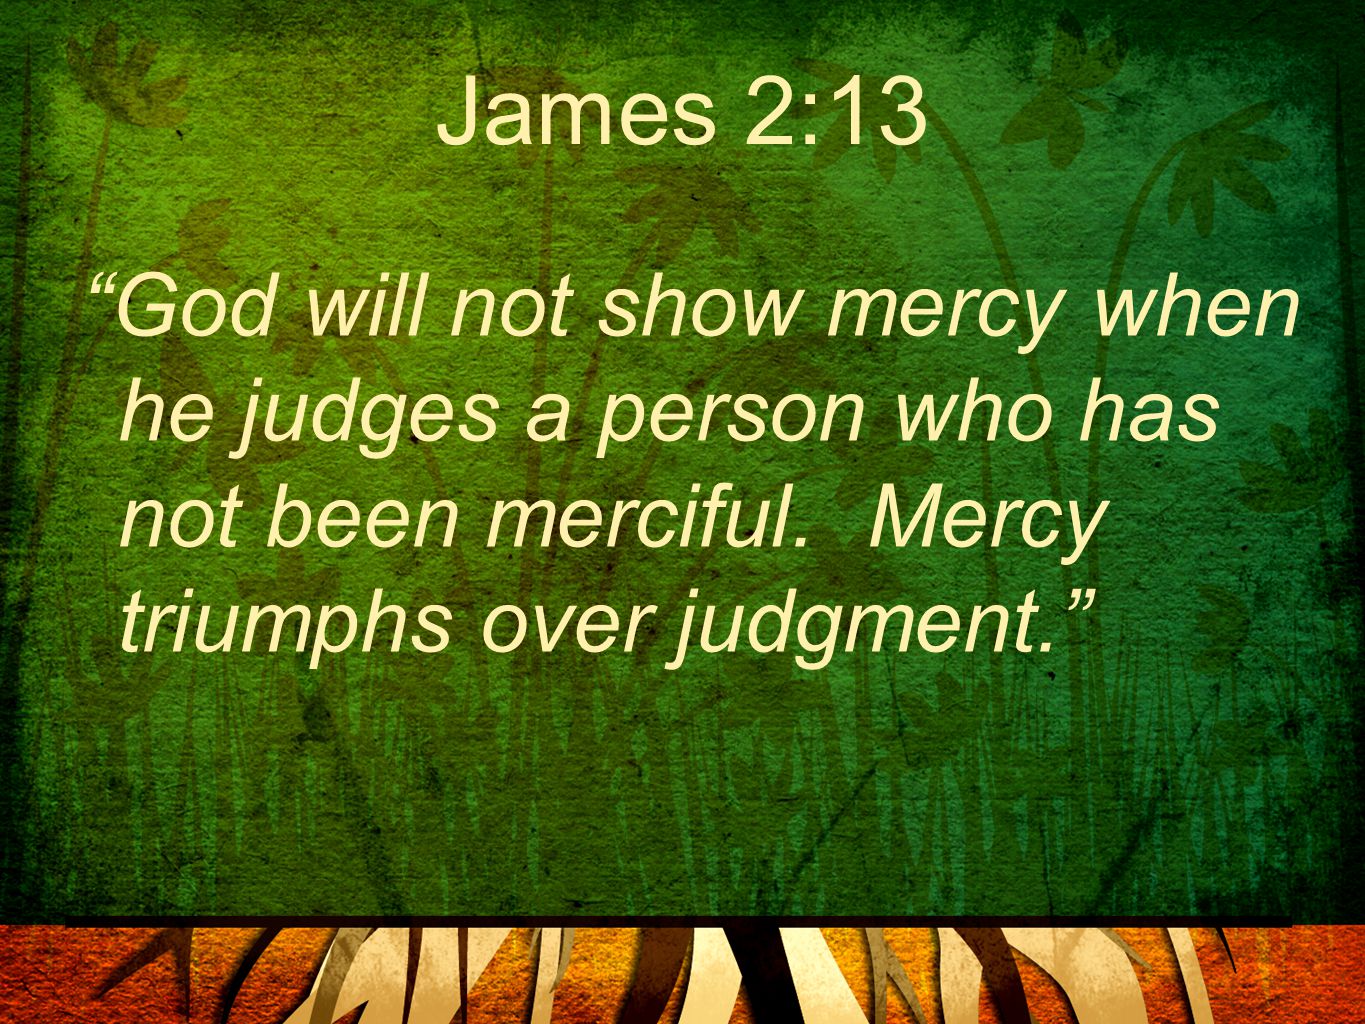 James 2:13 God will not show mercy when he judges a person who has not been merciful.